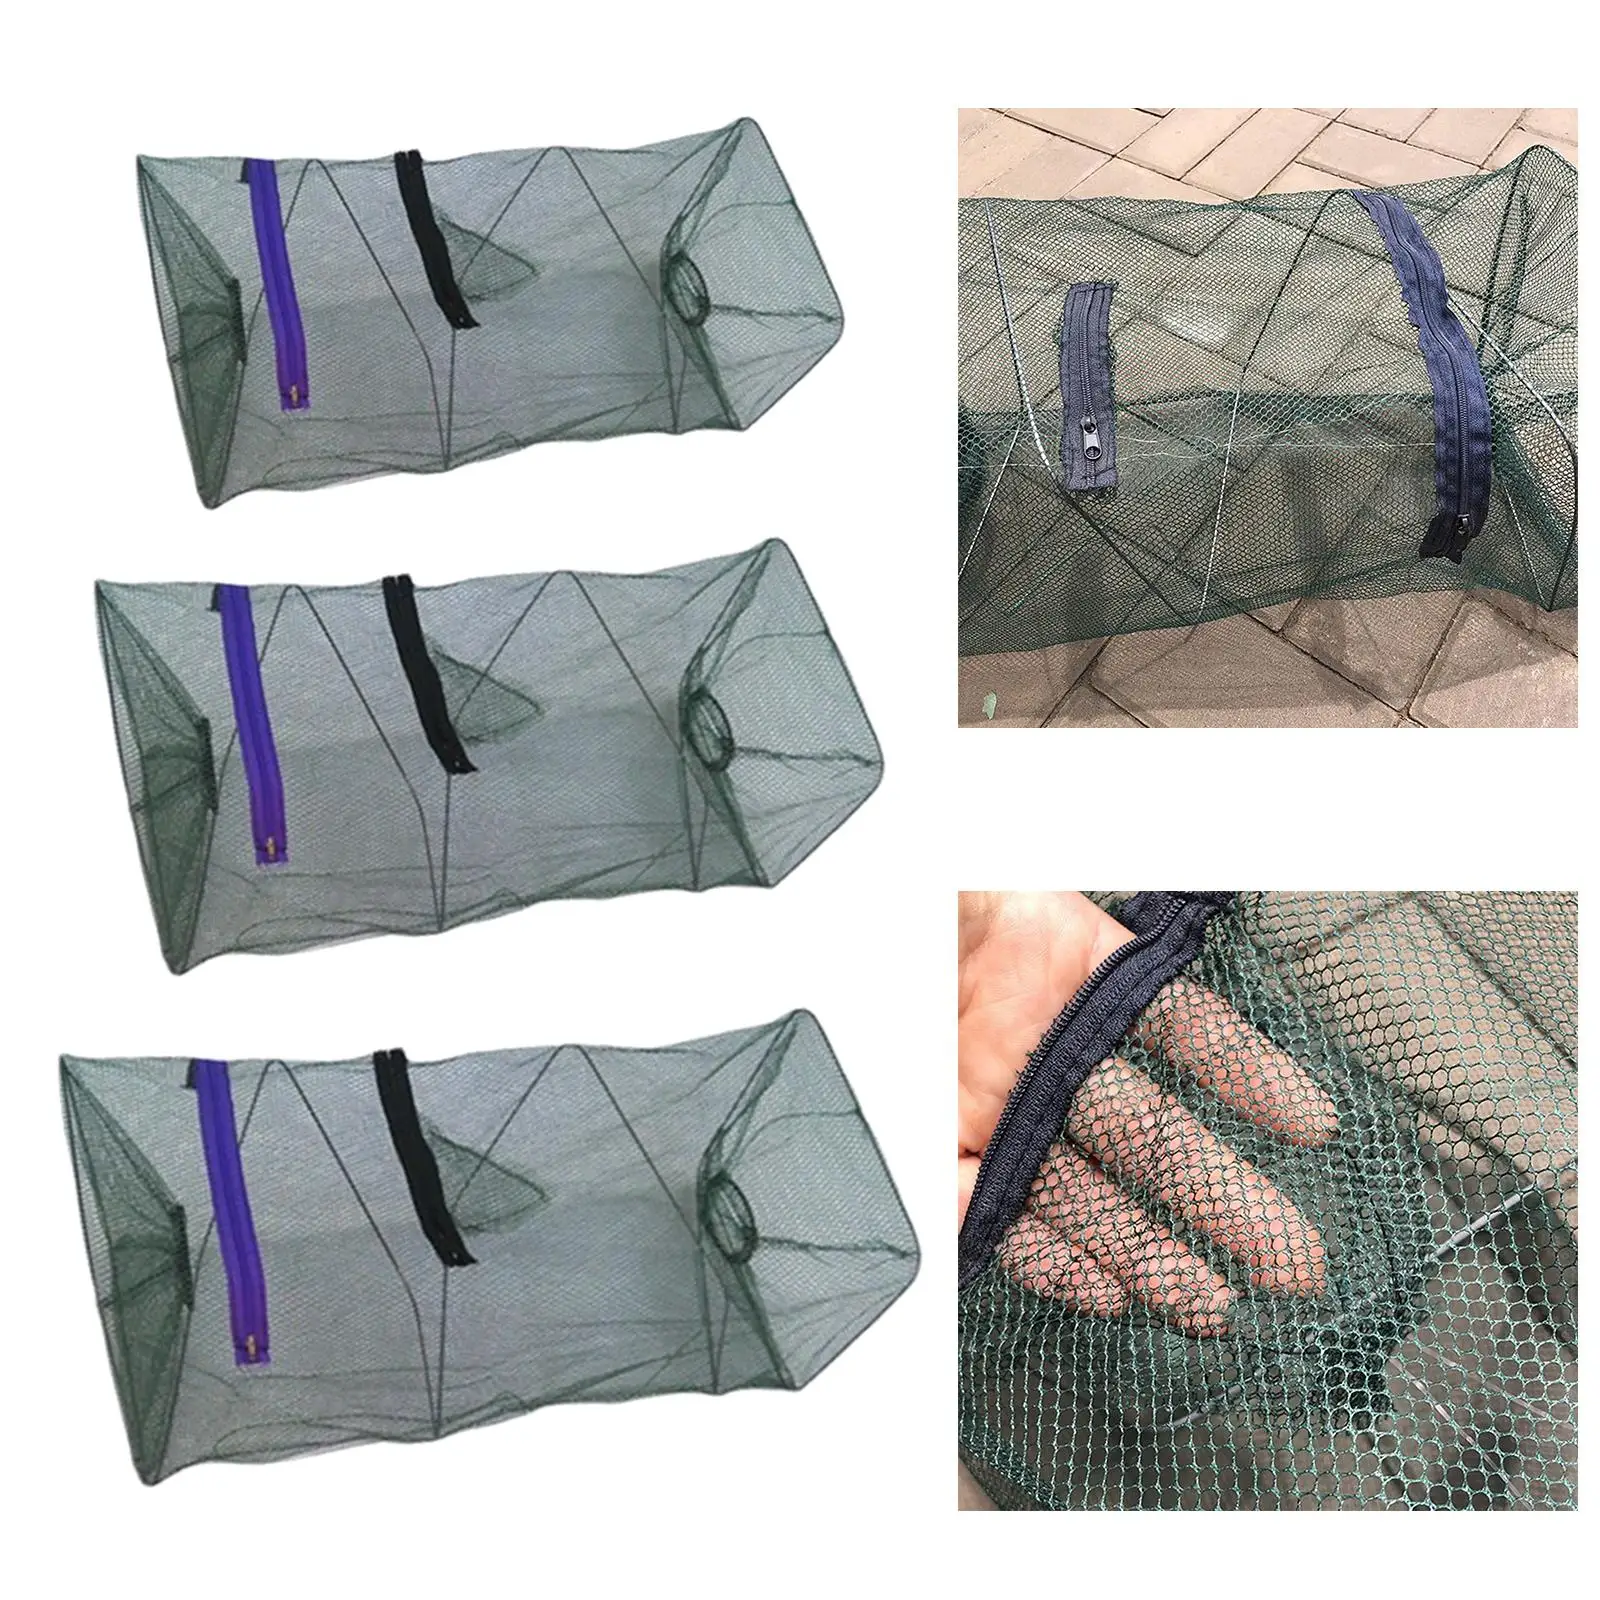 Professional Fishing Net Upgrade Fodable Net Fishing Mesh Easy to Use Net for Outdoor